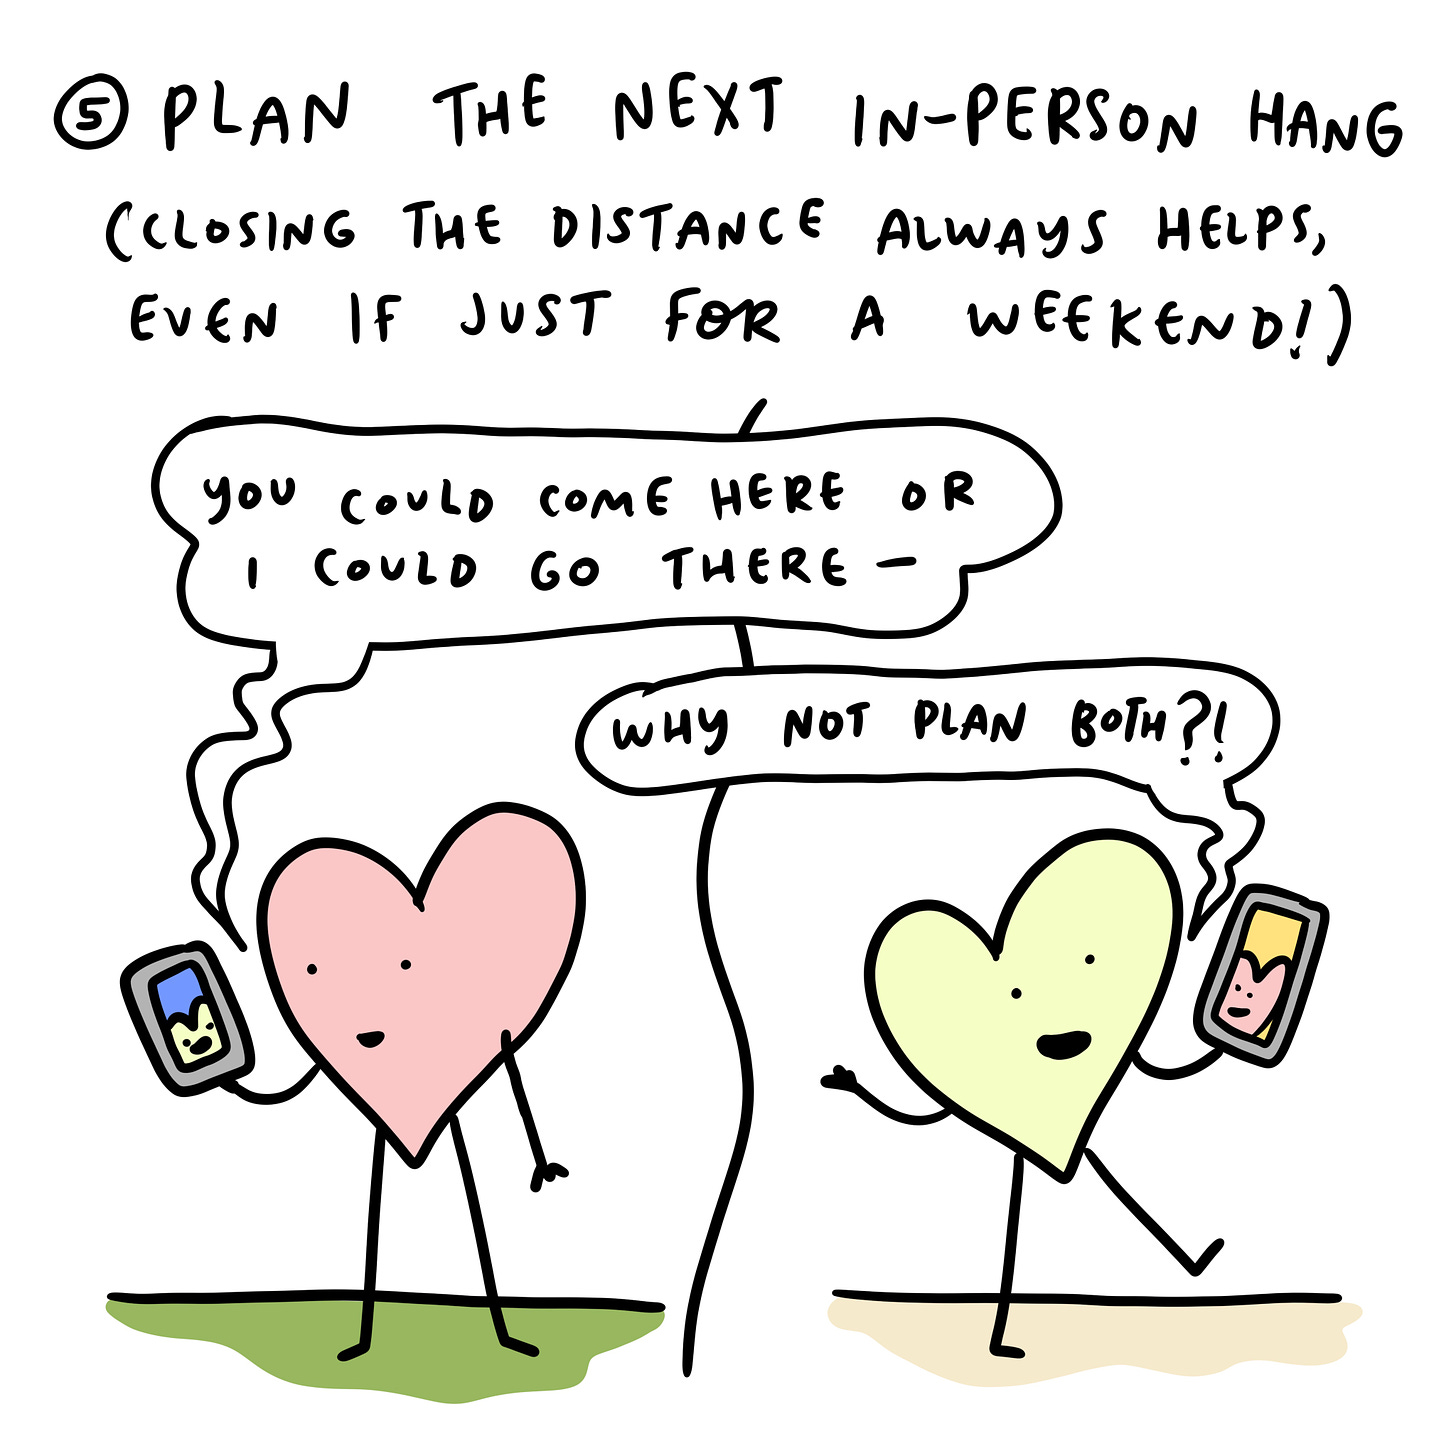 Have a plan to see each other (closing the distance always helps, even if just for a weekend trip)